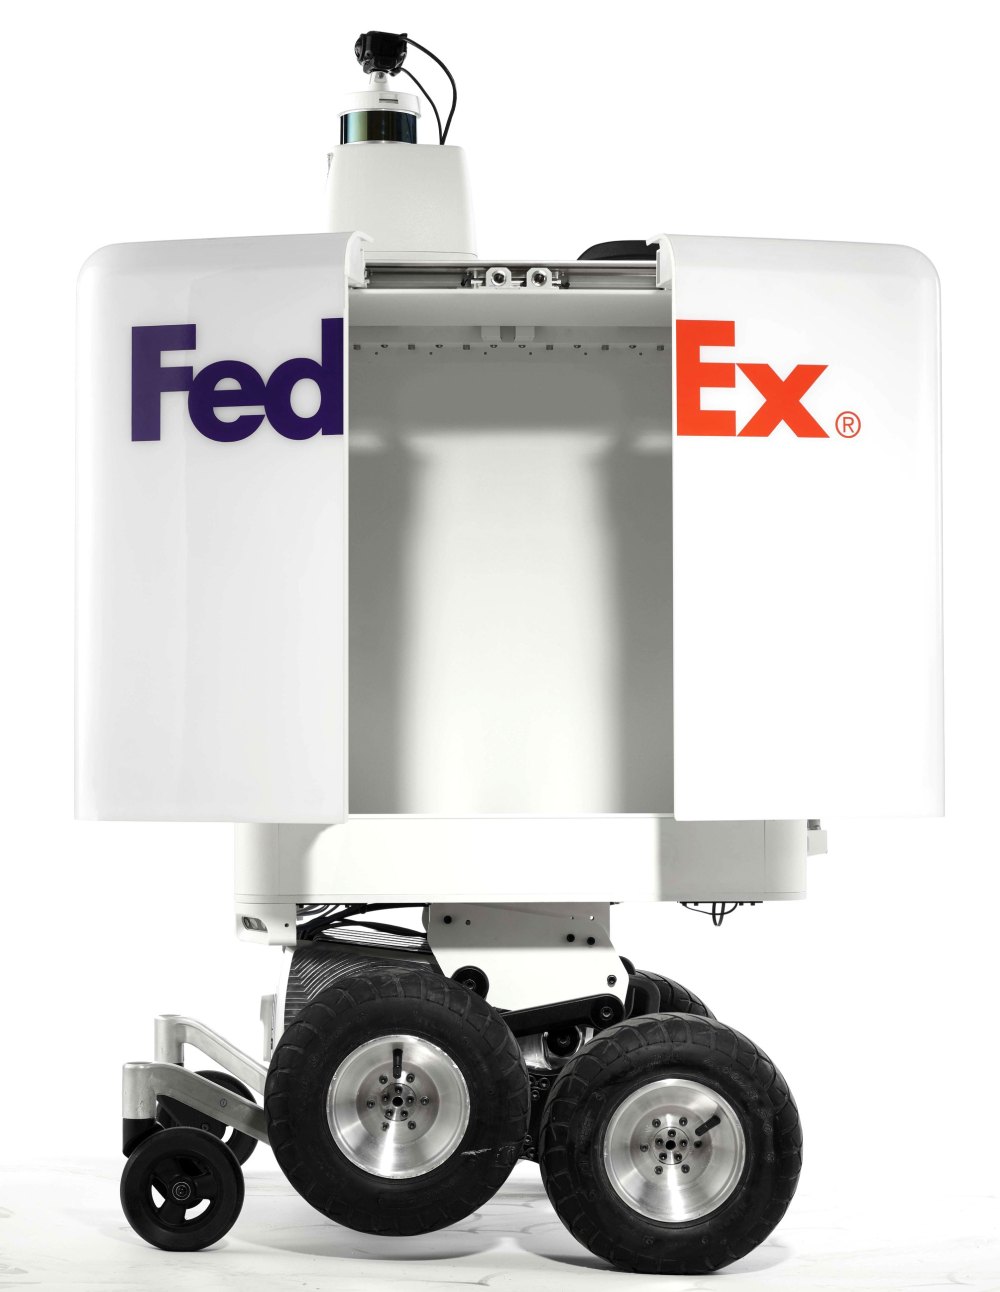 The Future Here! Pizza Hut, FedEx Team Up to Launch Delivery Robot